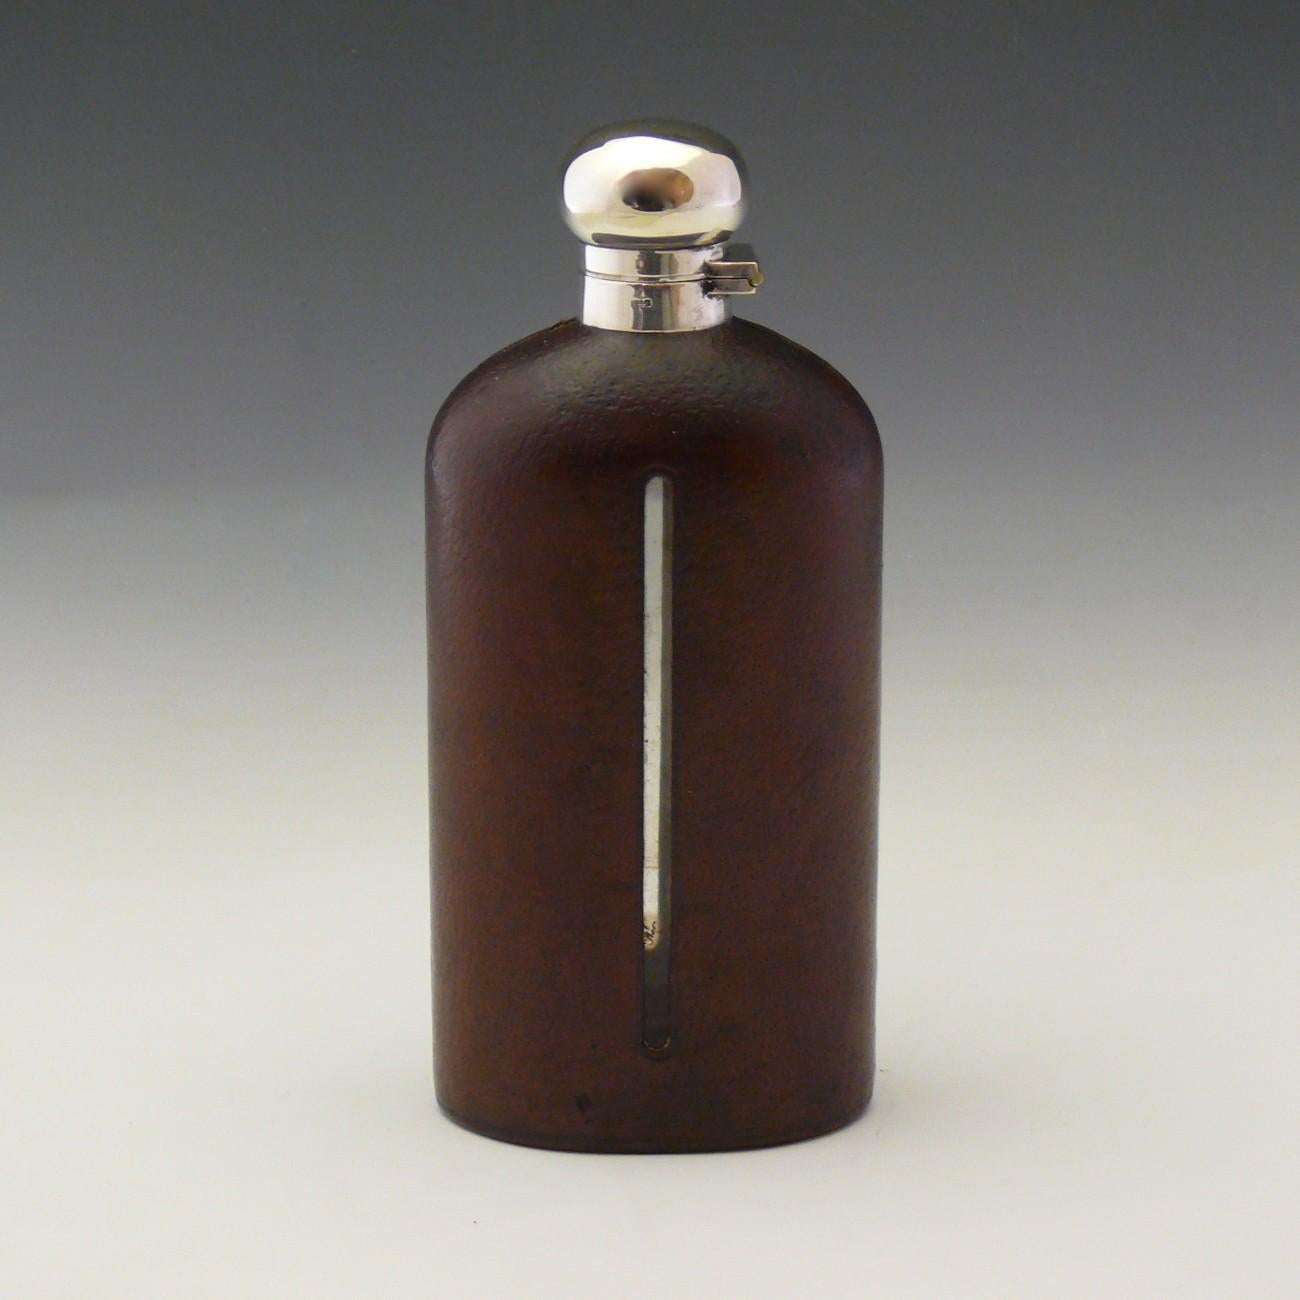 A fine pig skin leather covered glass hip flask with silver plated top of generous size.

Dimensions 23 cm/9 inches (height) x 10 cm/4 inches (width)

Bentleys are Members of LAPADA, the London and Provincial Antique Dealers Association.